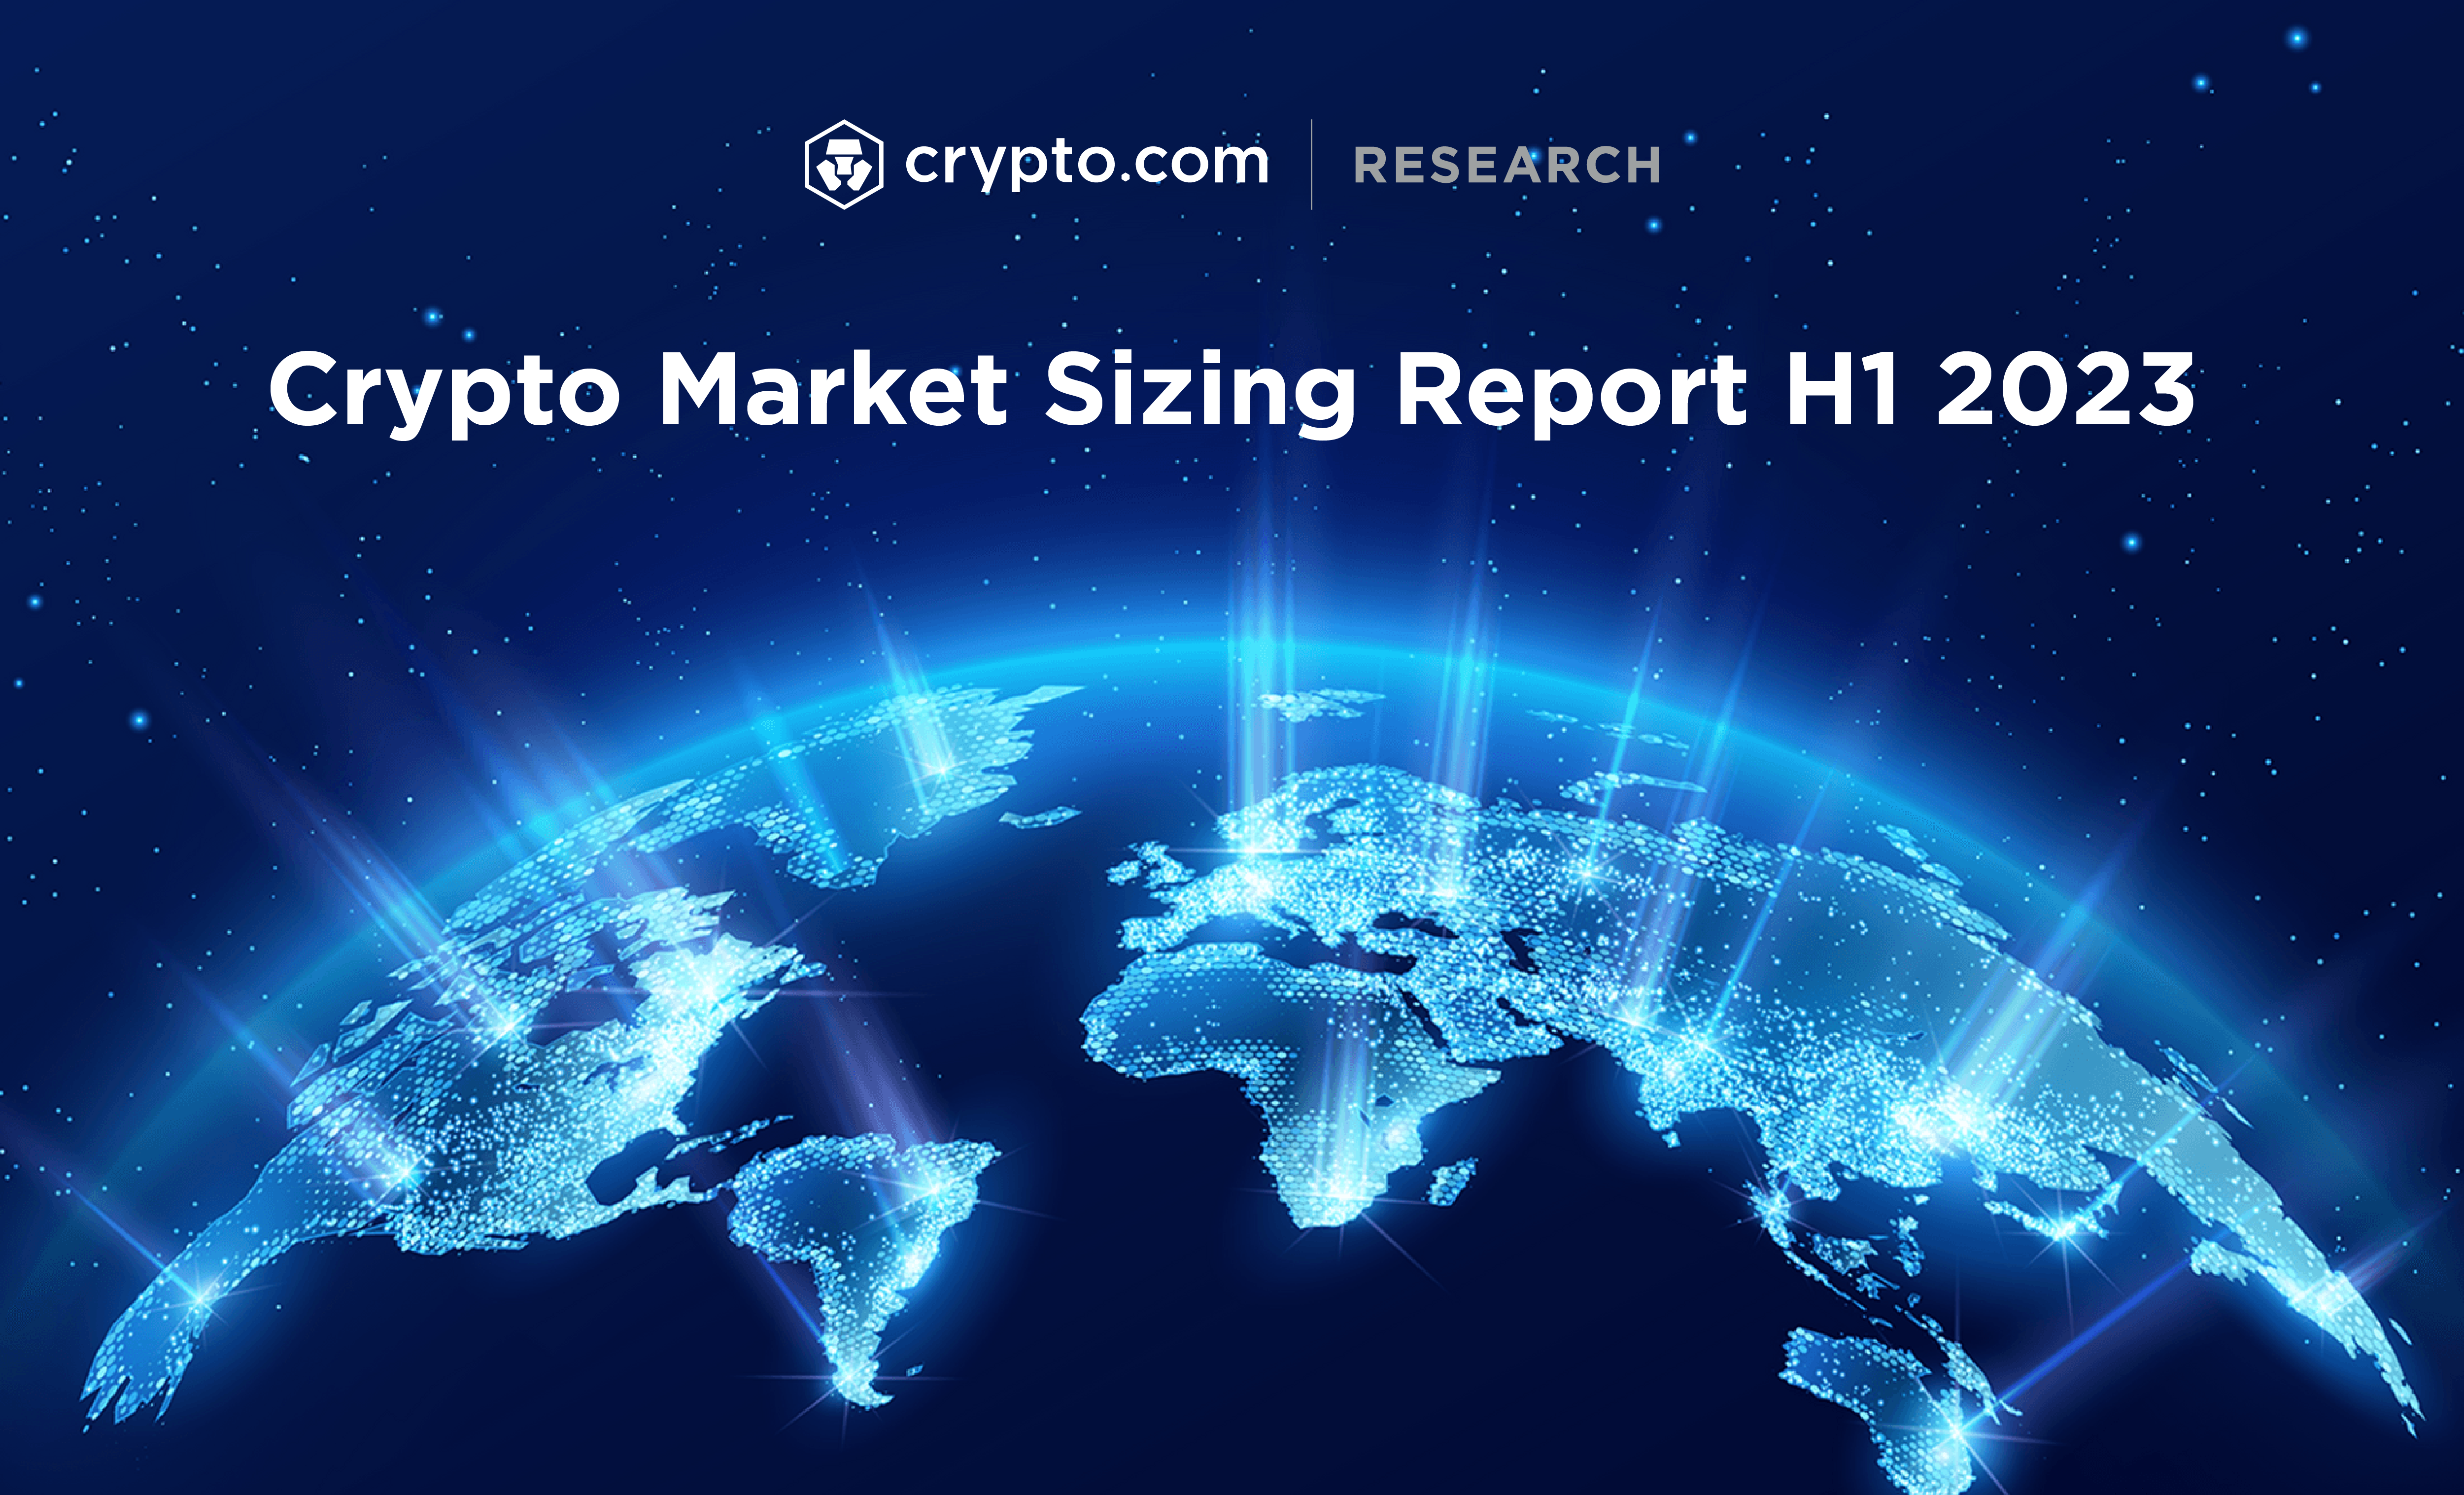 Crypto Sizing Report H1 2023